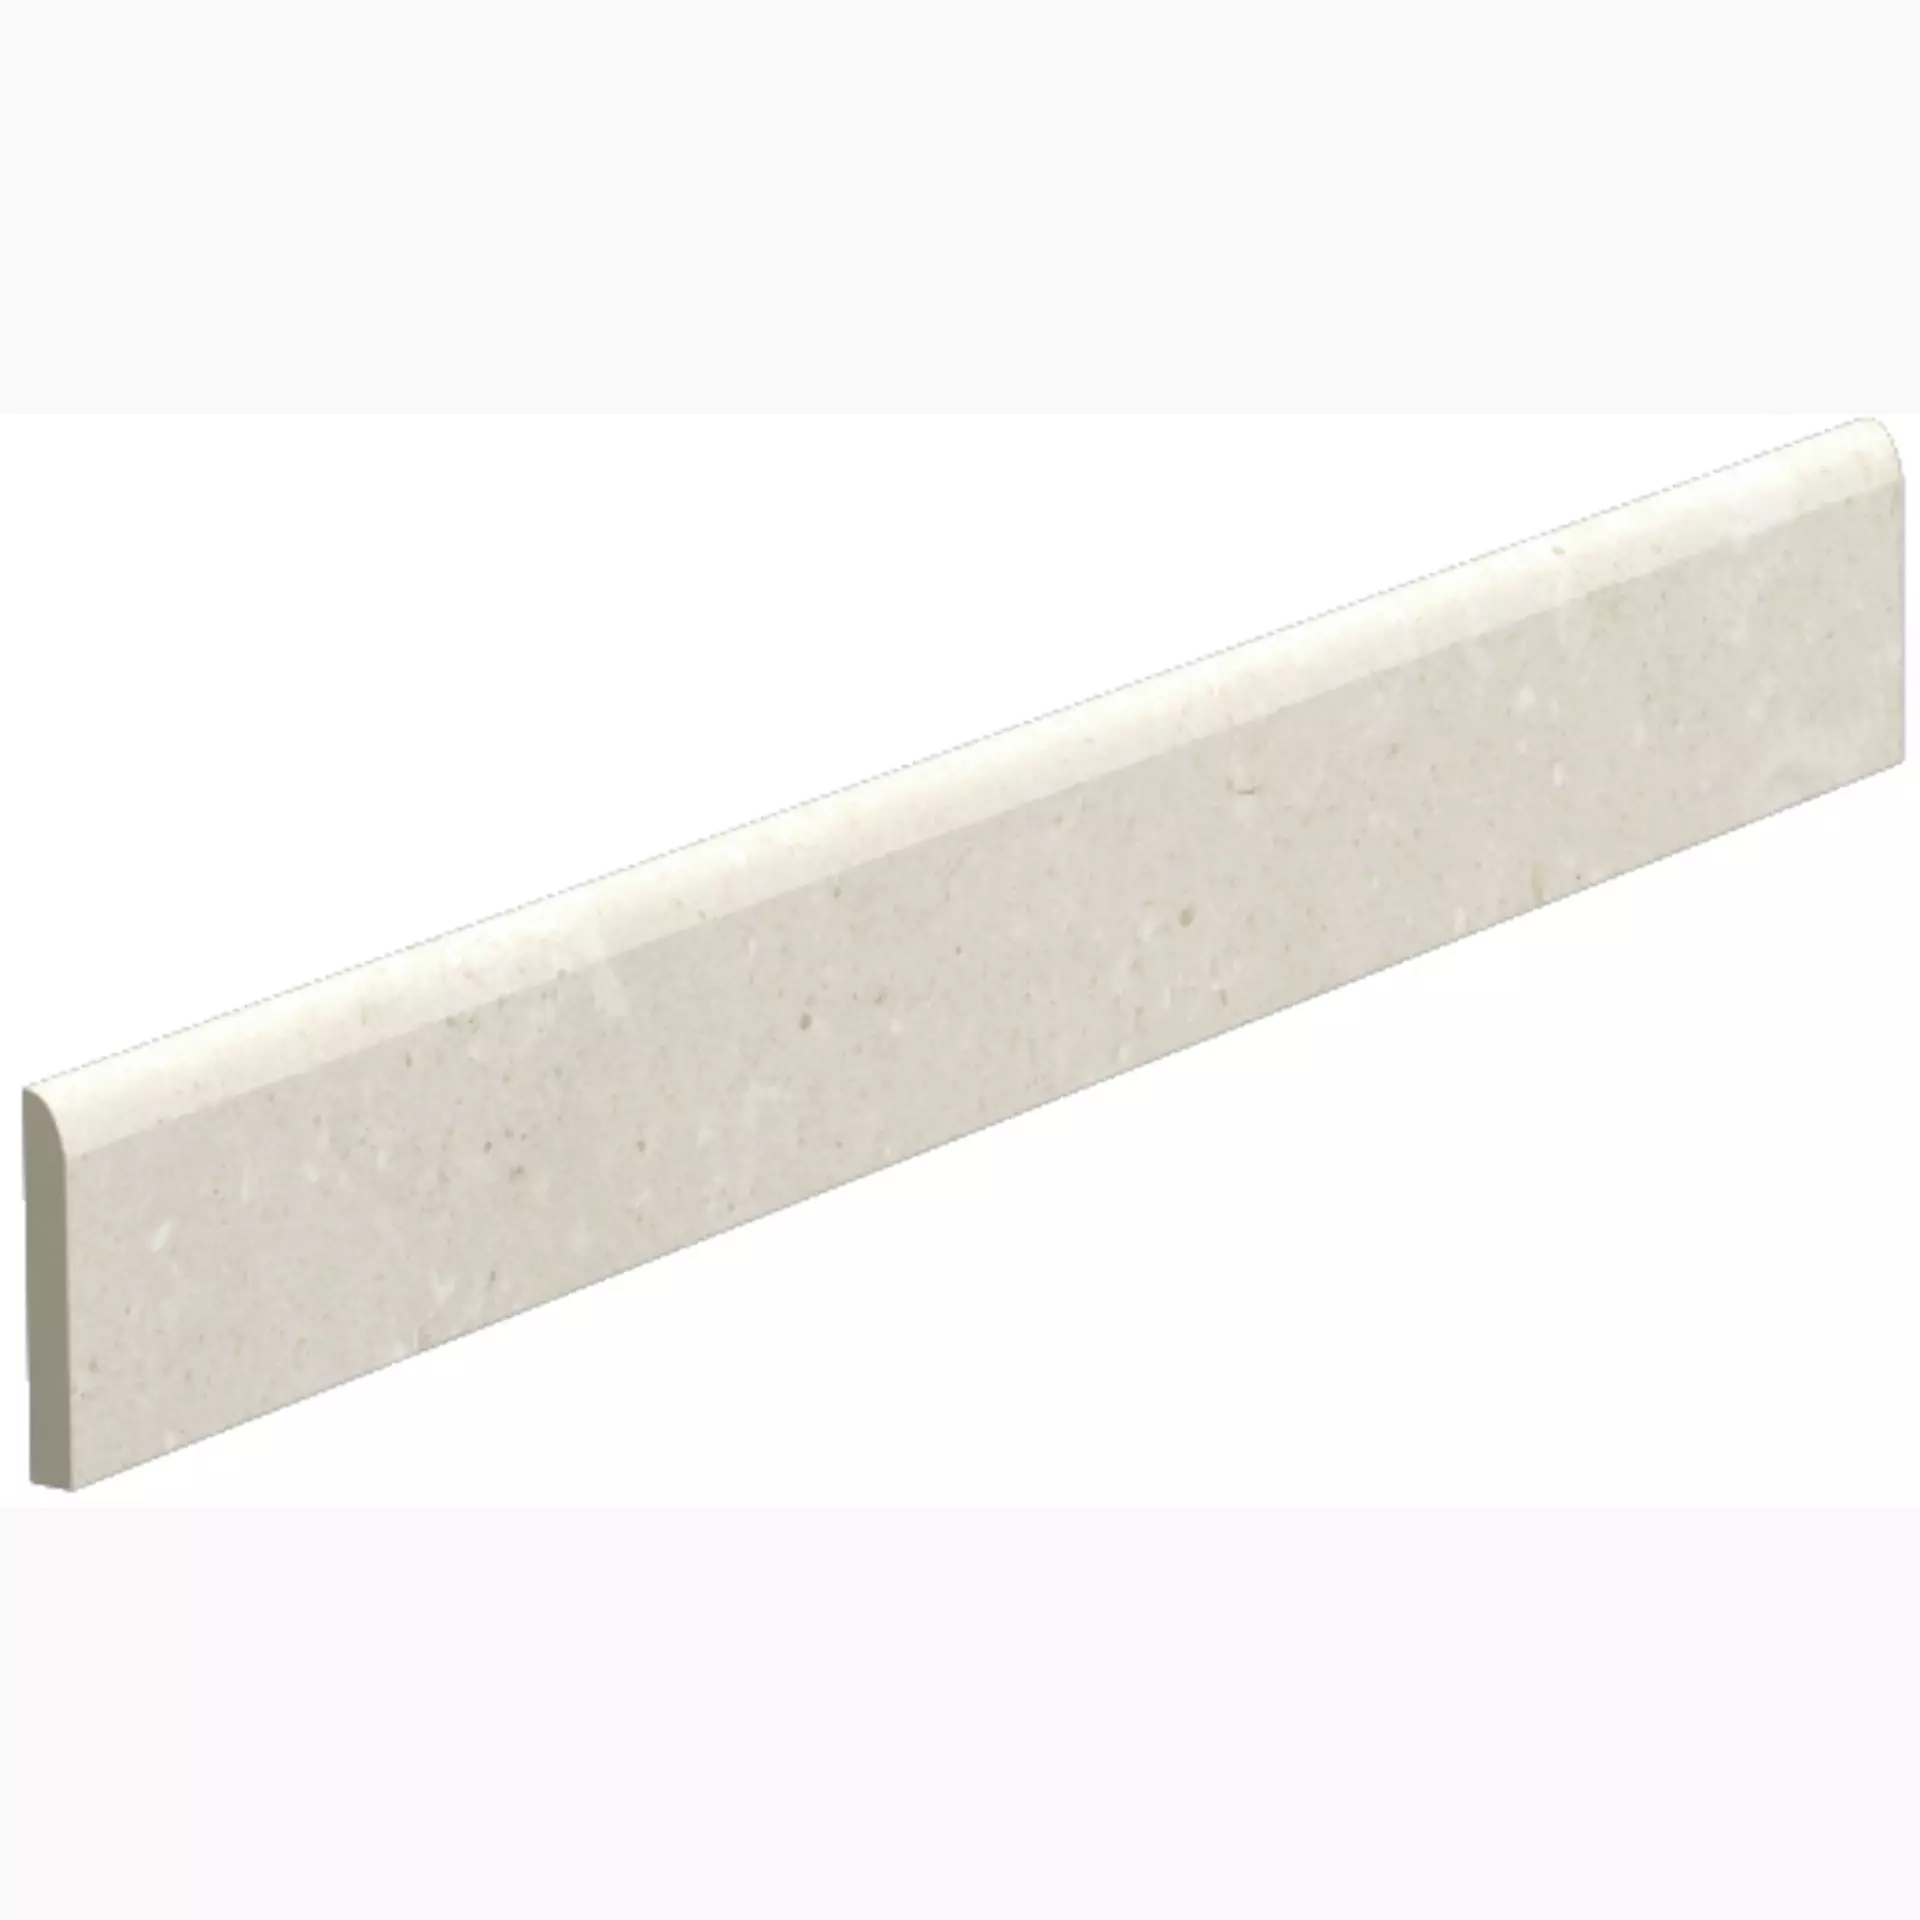 Del Conca Hwd Wild White Hwd10 Naturale Skirting board G0WD10R60 7,5x60cm rectified 8,5mm